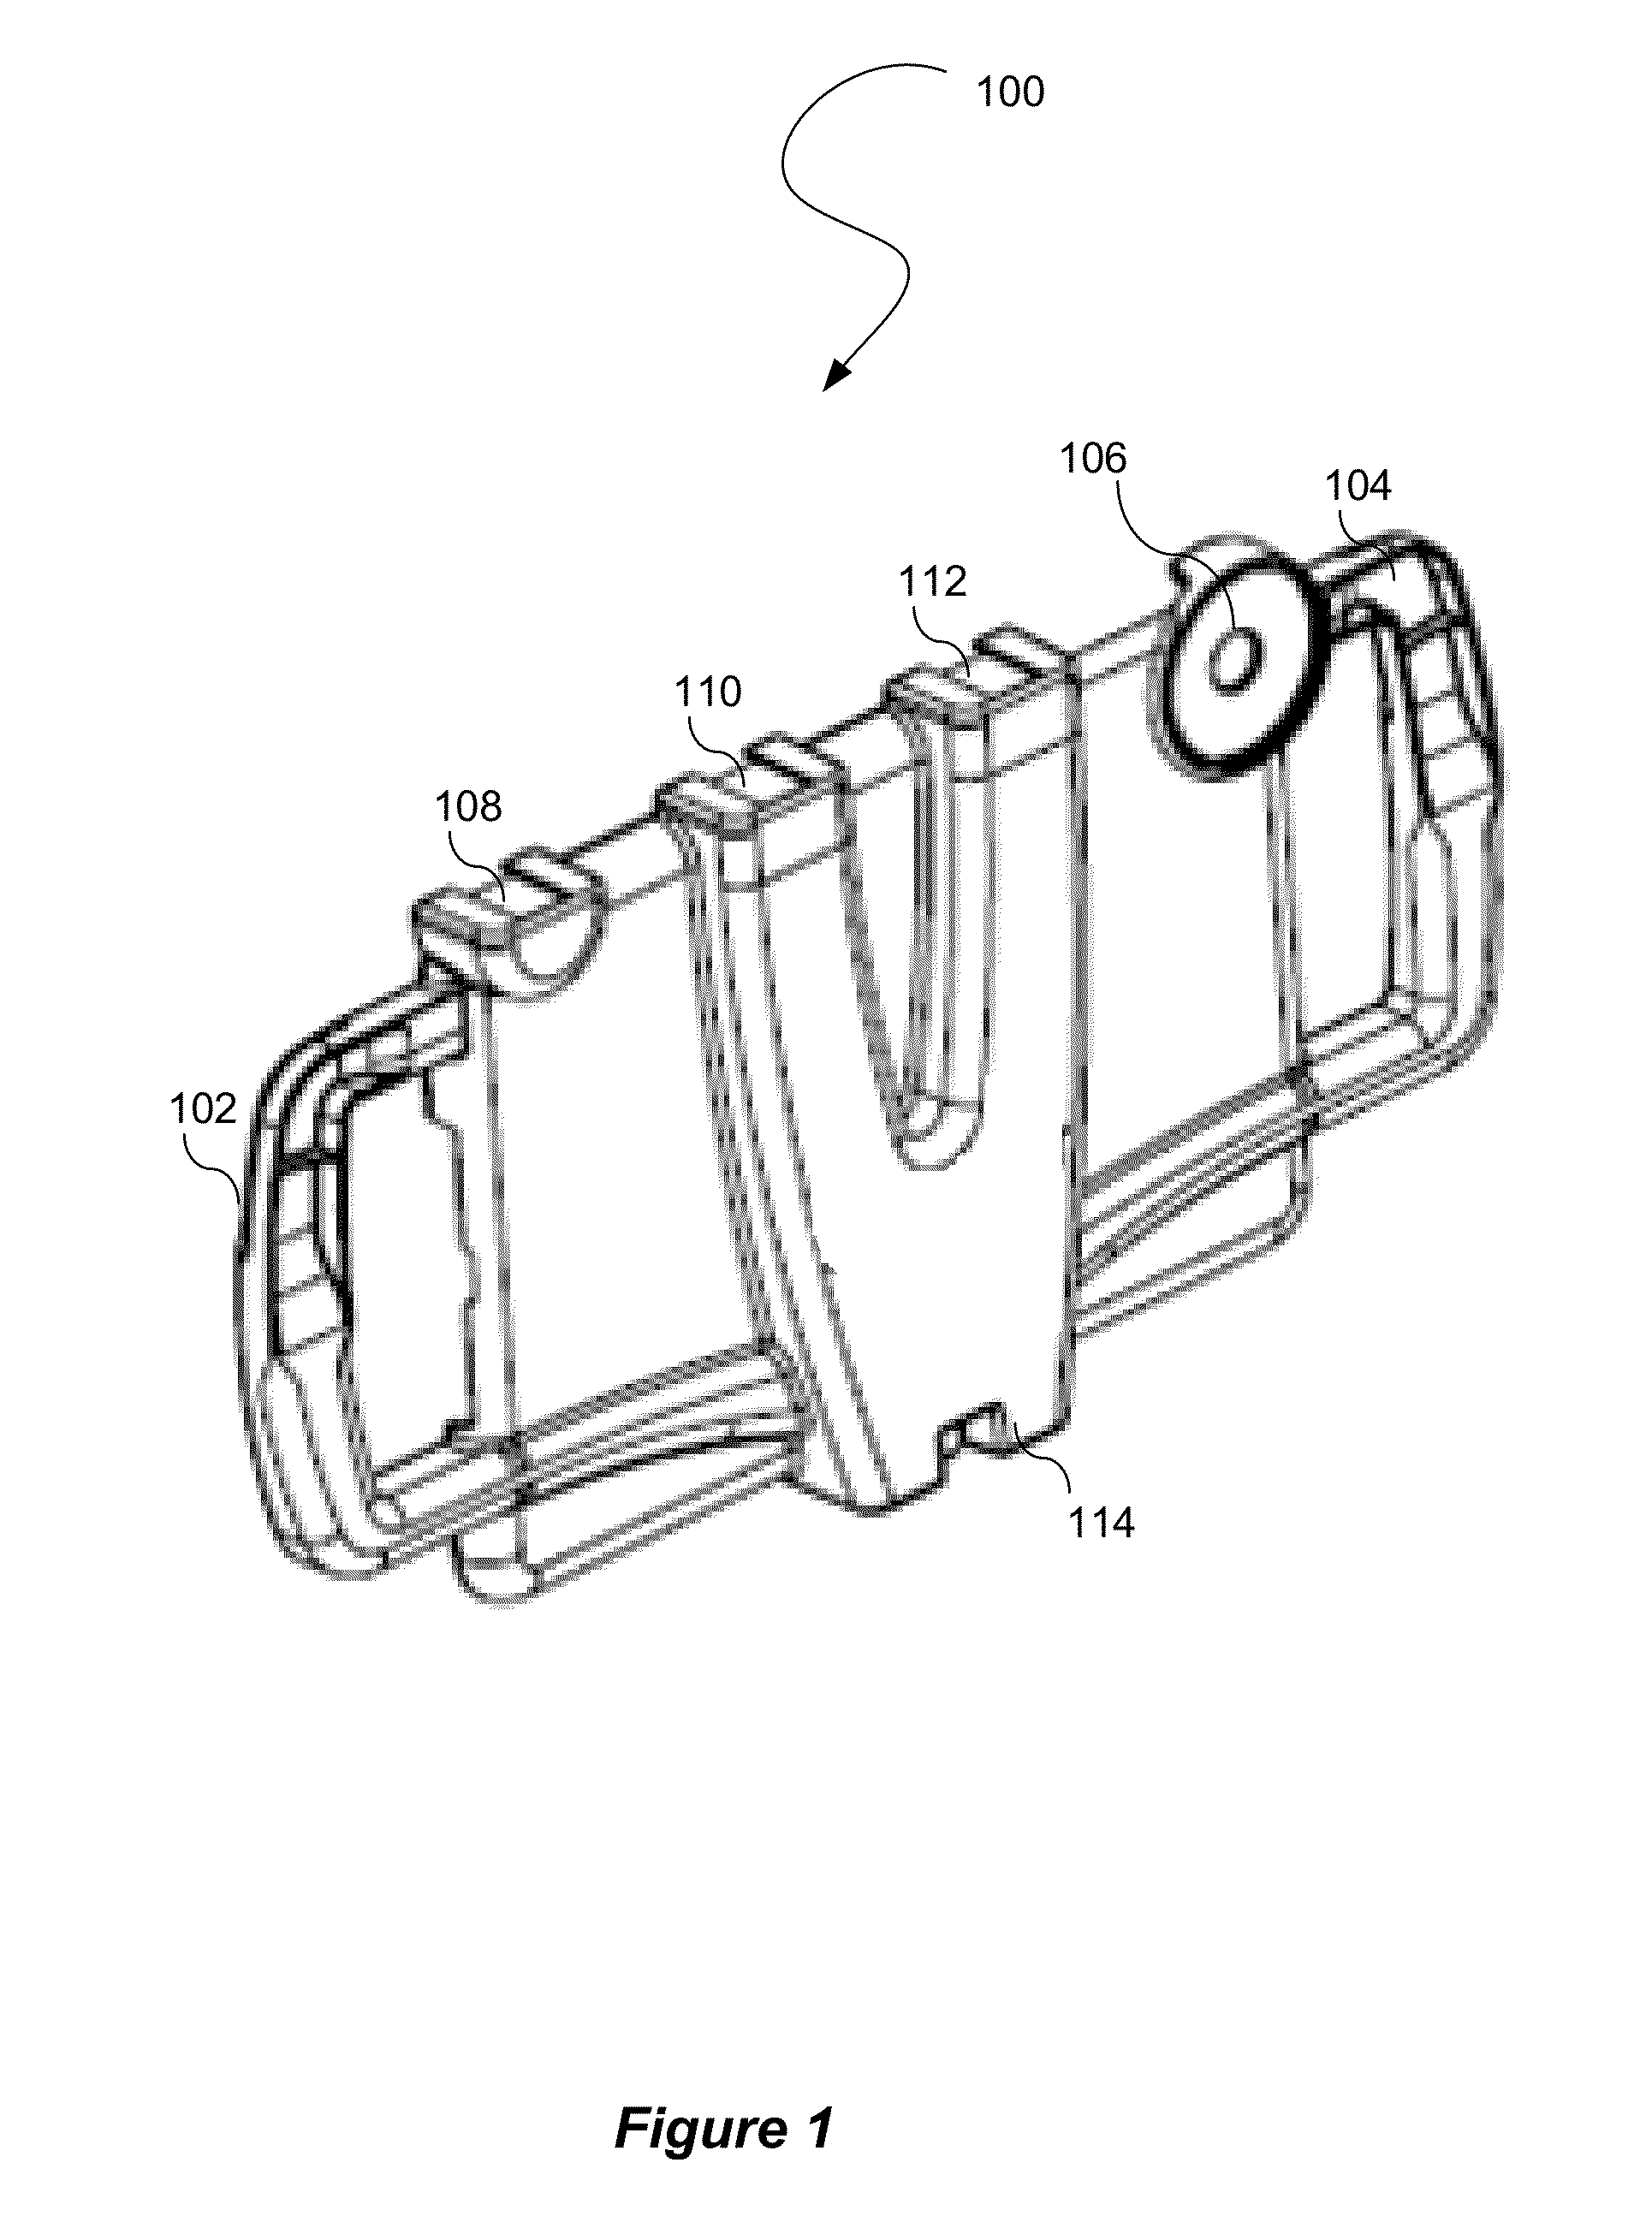 Receptacle for an image capture computing device